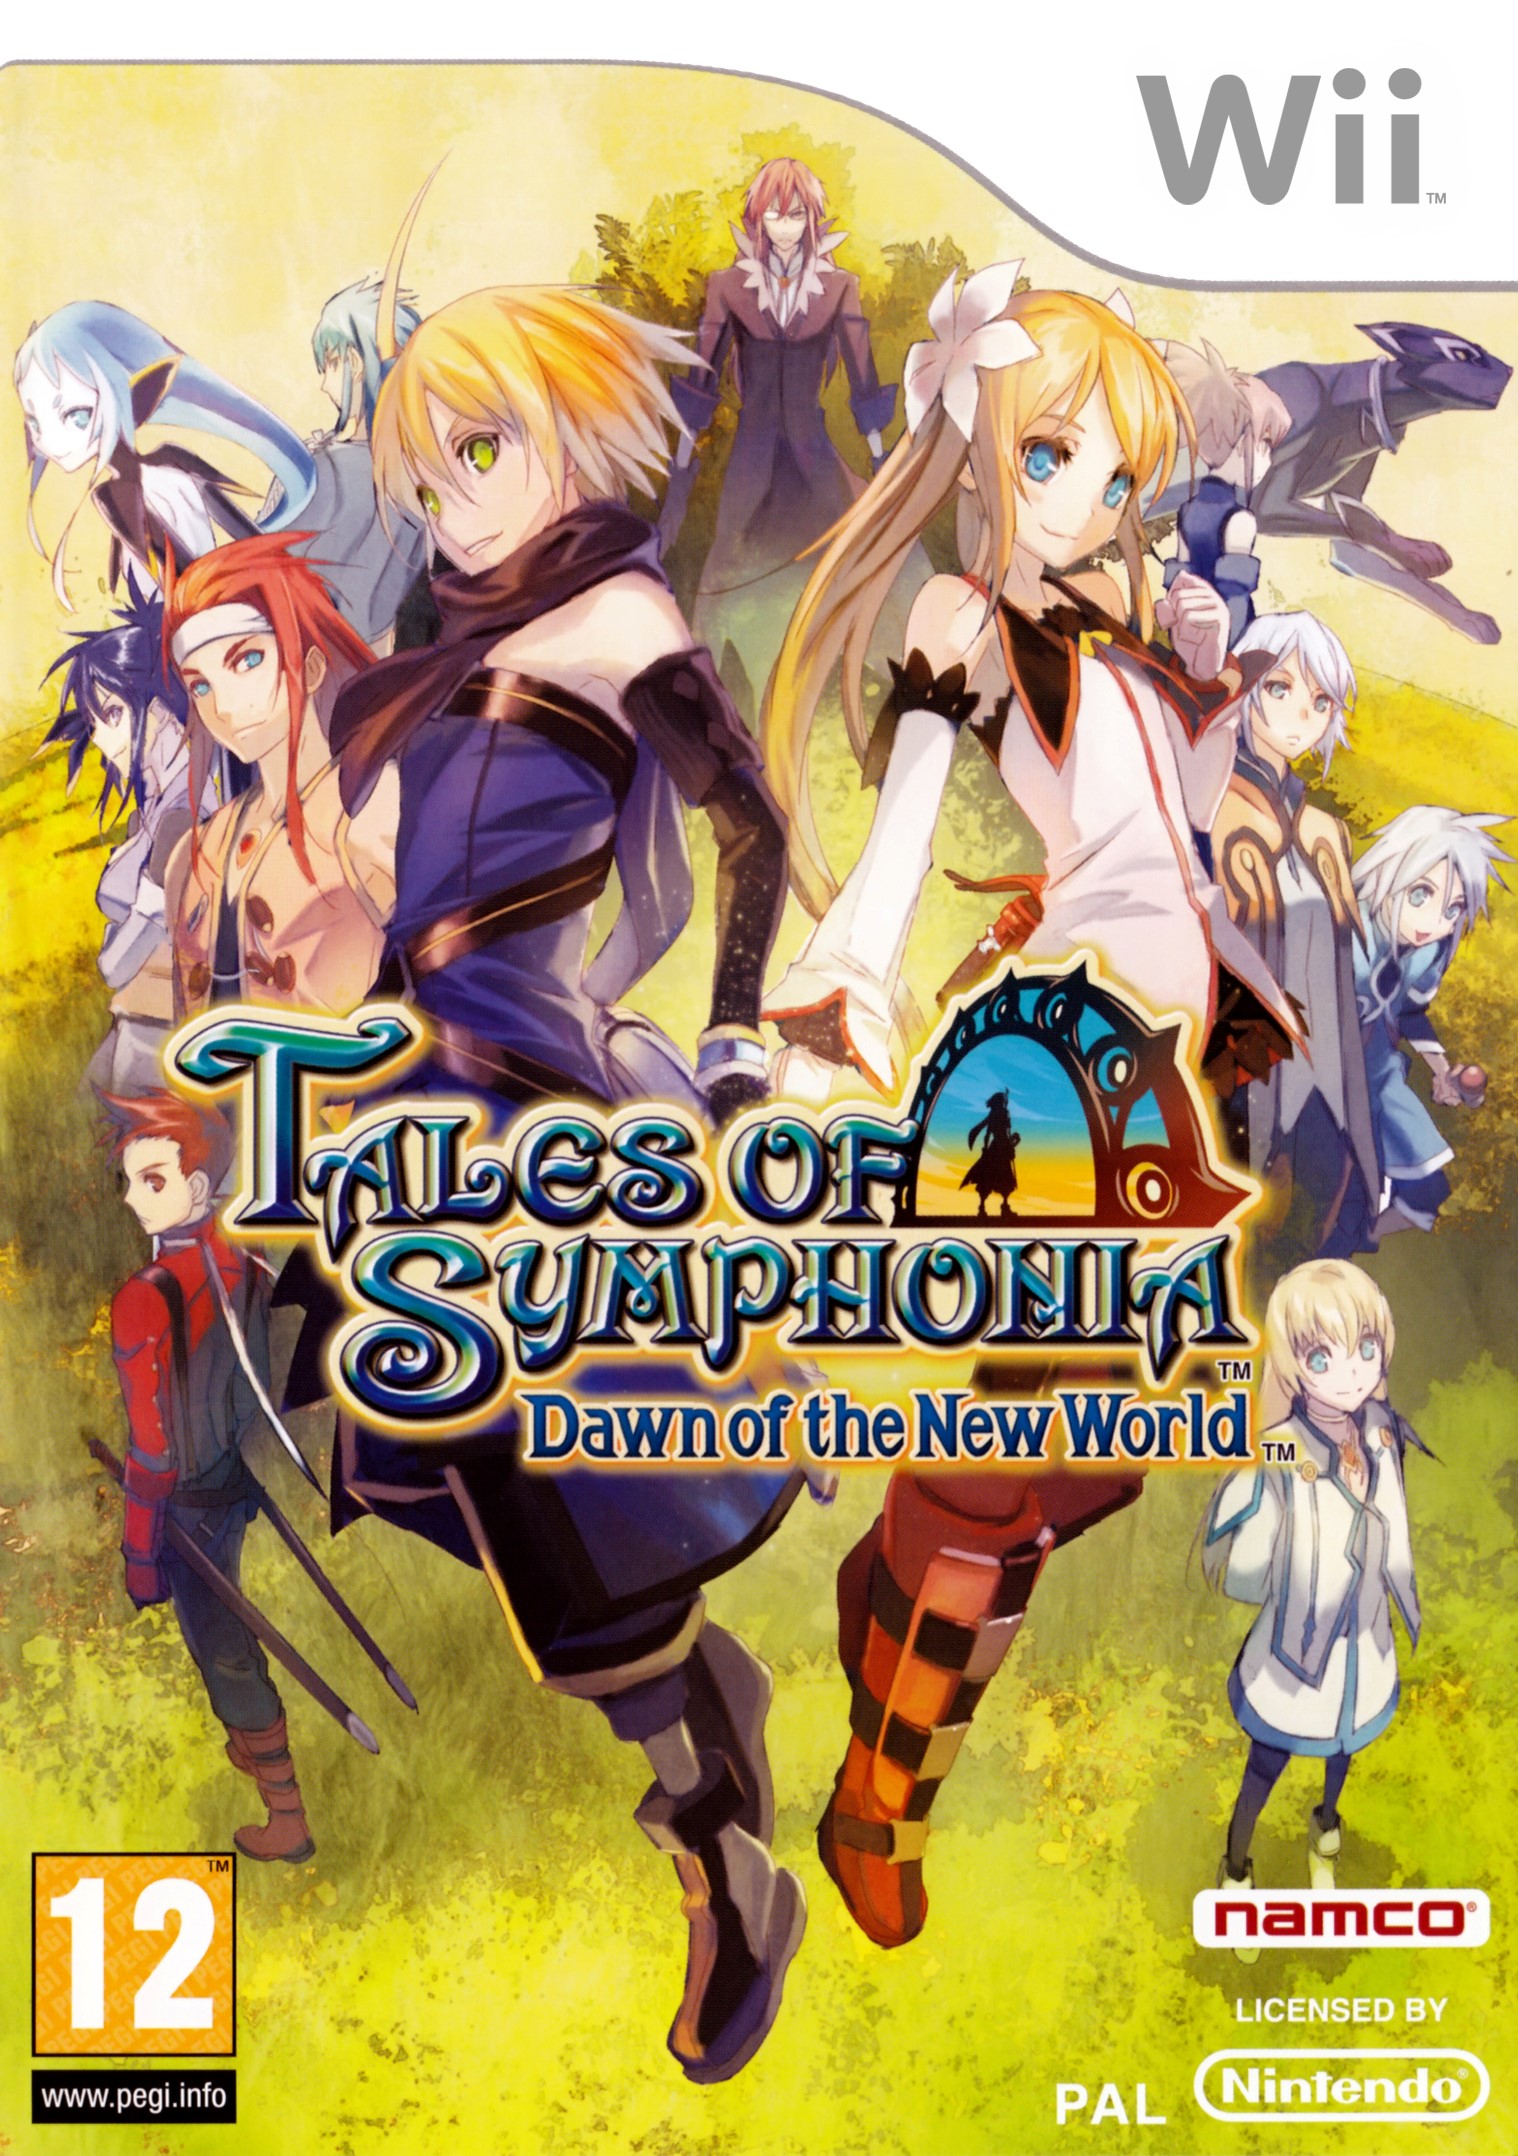 'Tales of Symphonia: Dawn of the New World'